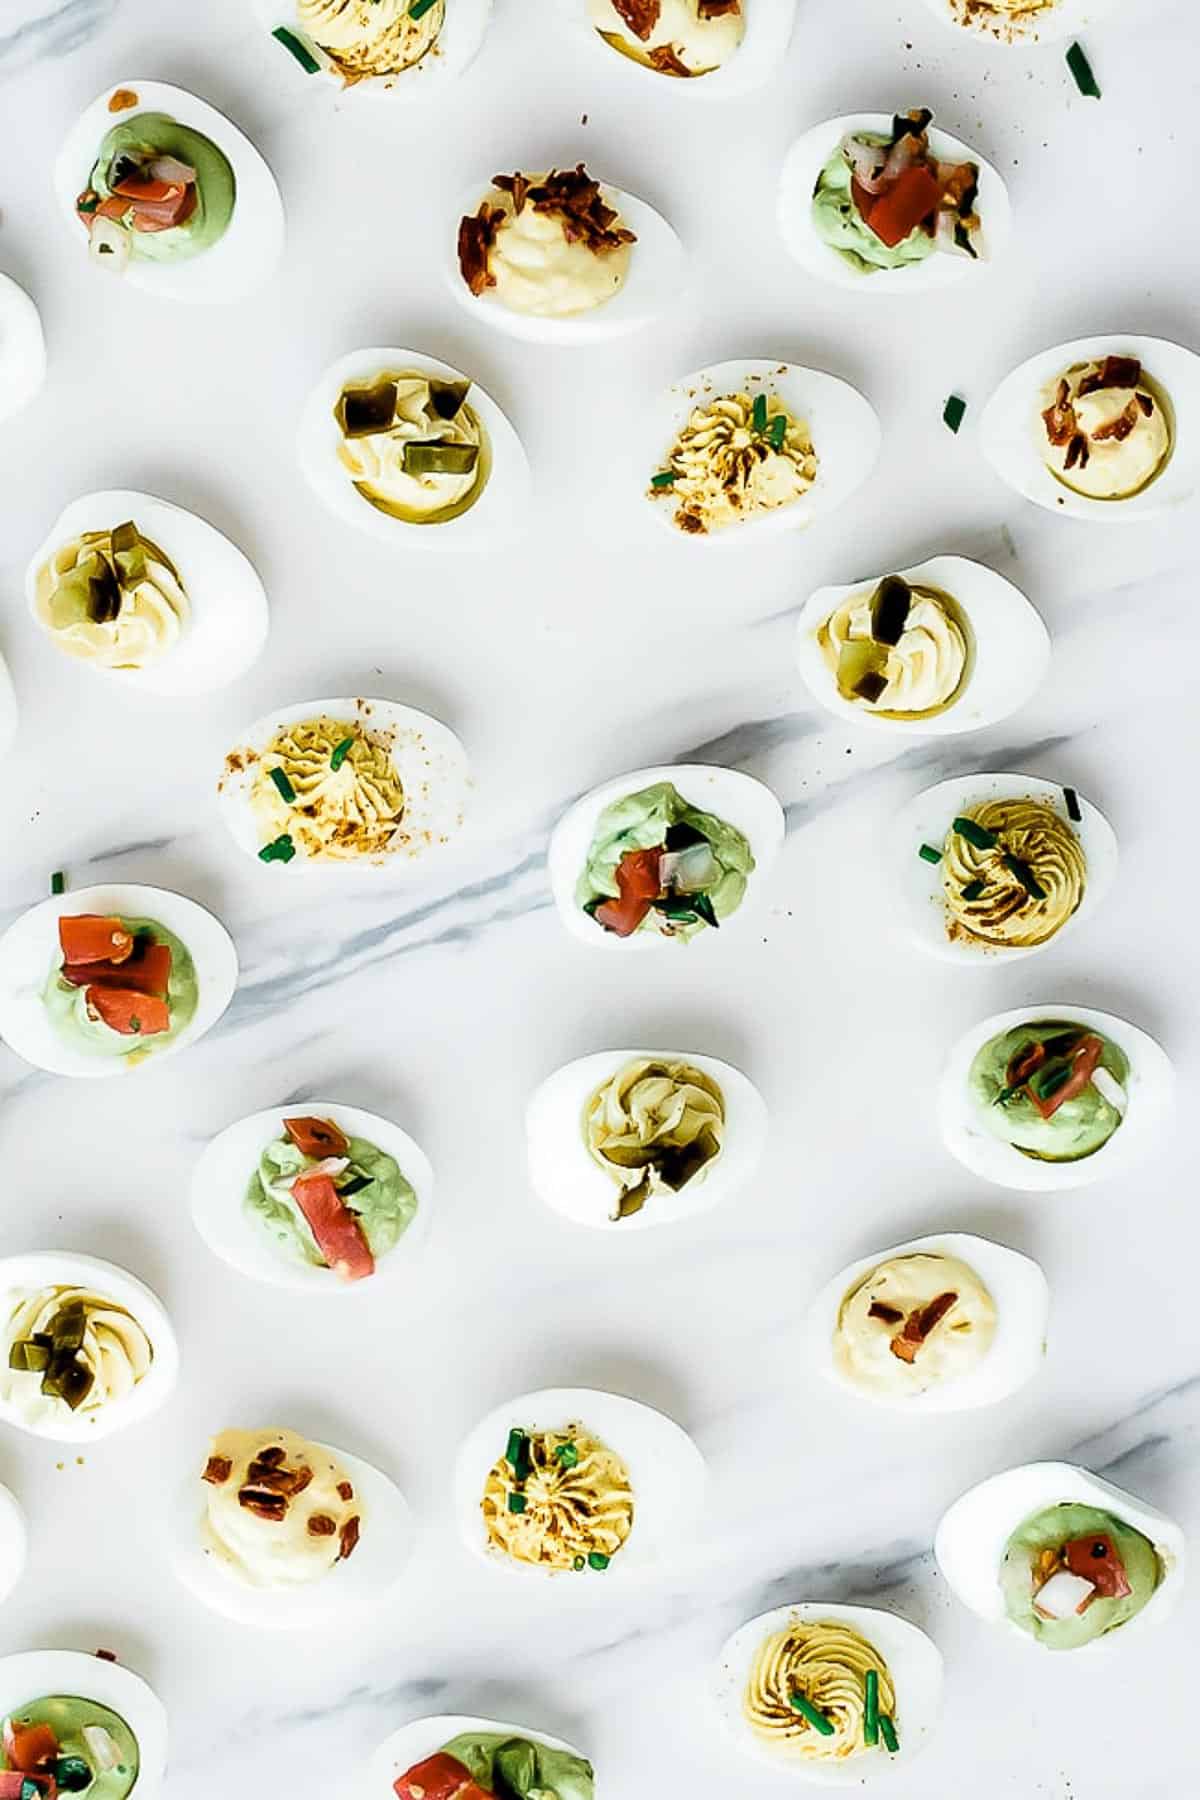 5 star deviled egg recipe on a marble counter, several scattered around and garnished in various ways.